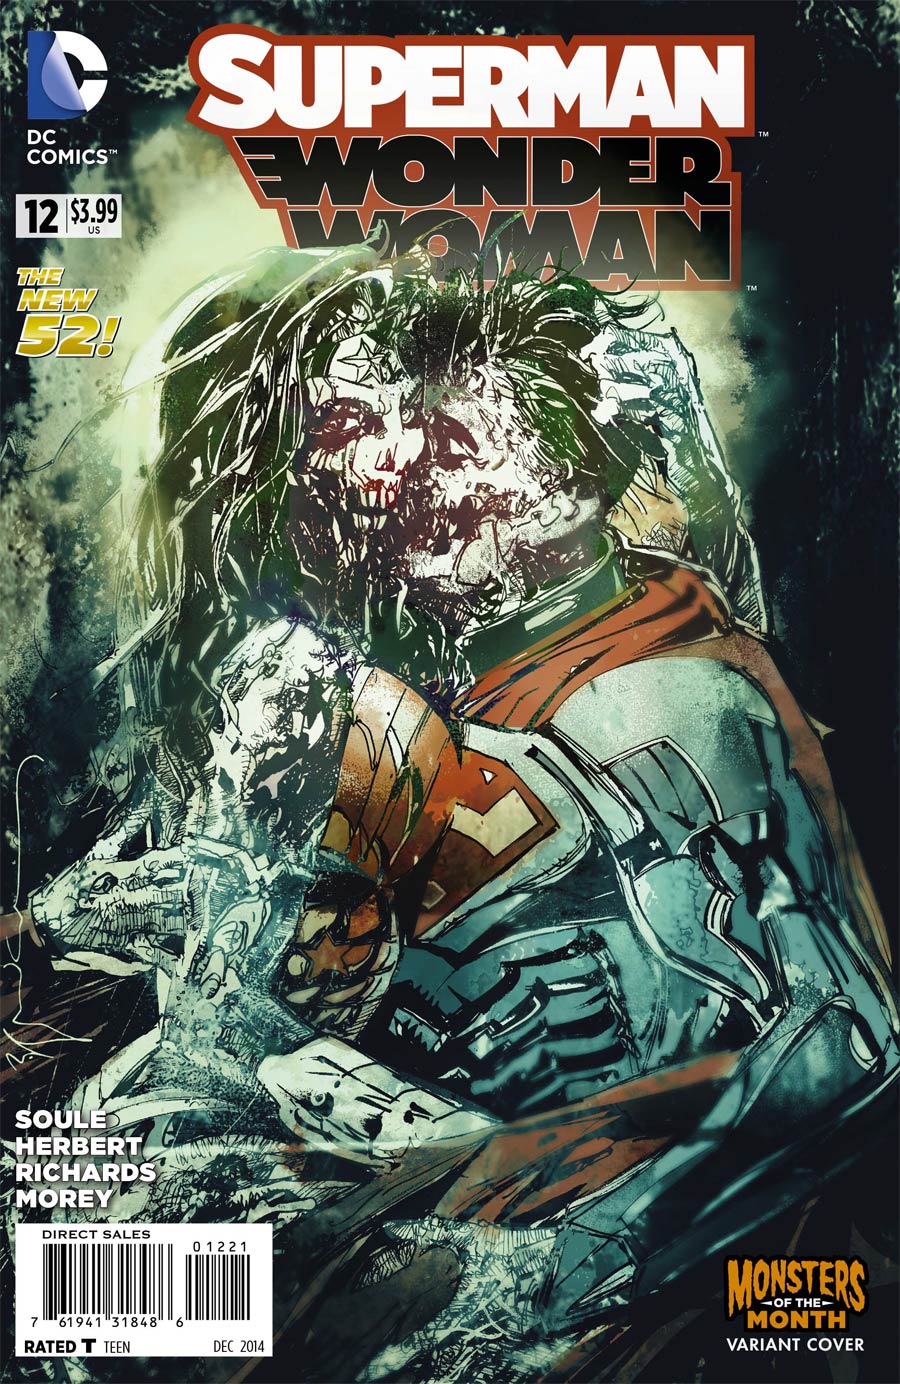 Superman Wonder Woman #12 Cover B Variant Bill Sienkiewicz Monsters Cover (Superman Doomed Aftermath)